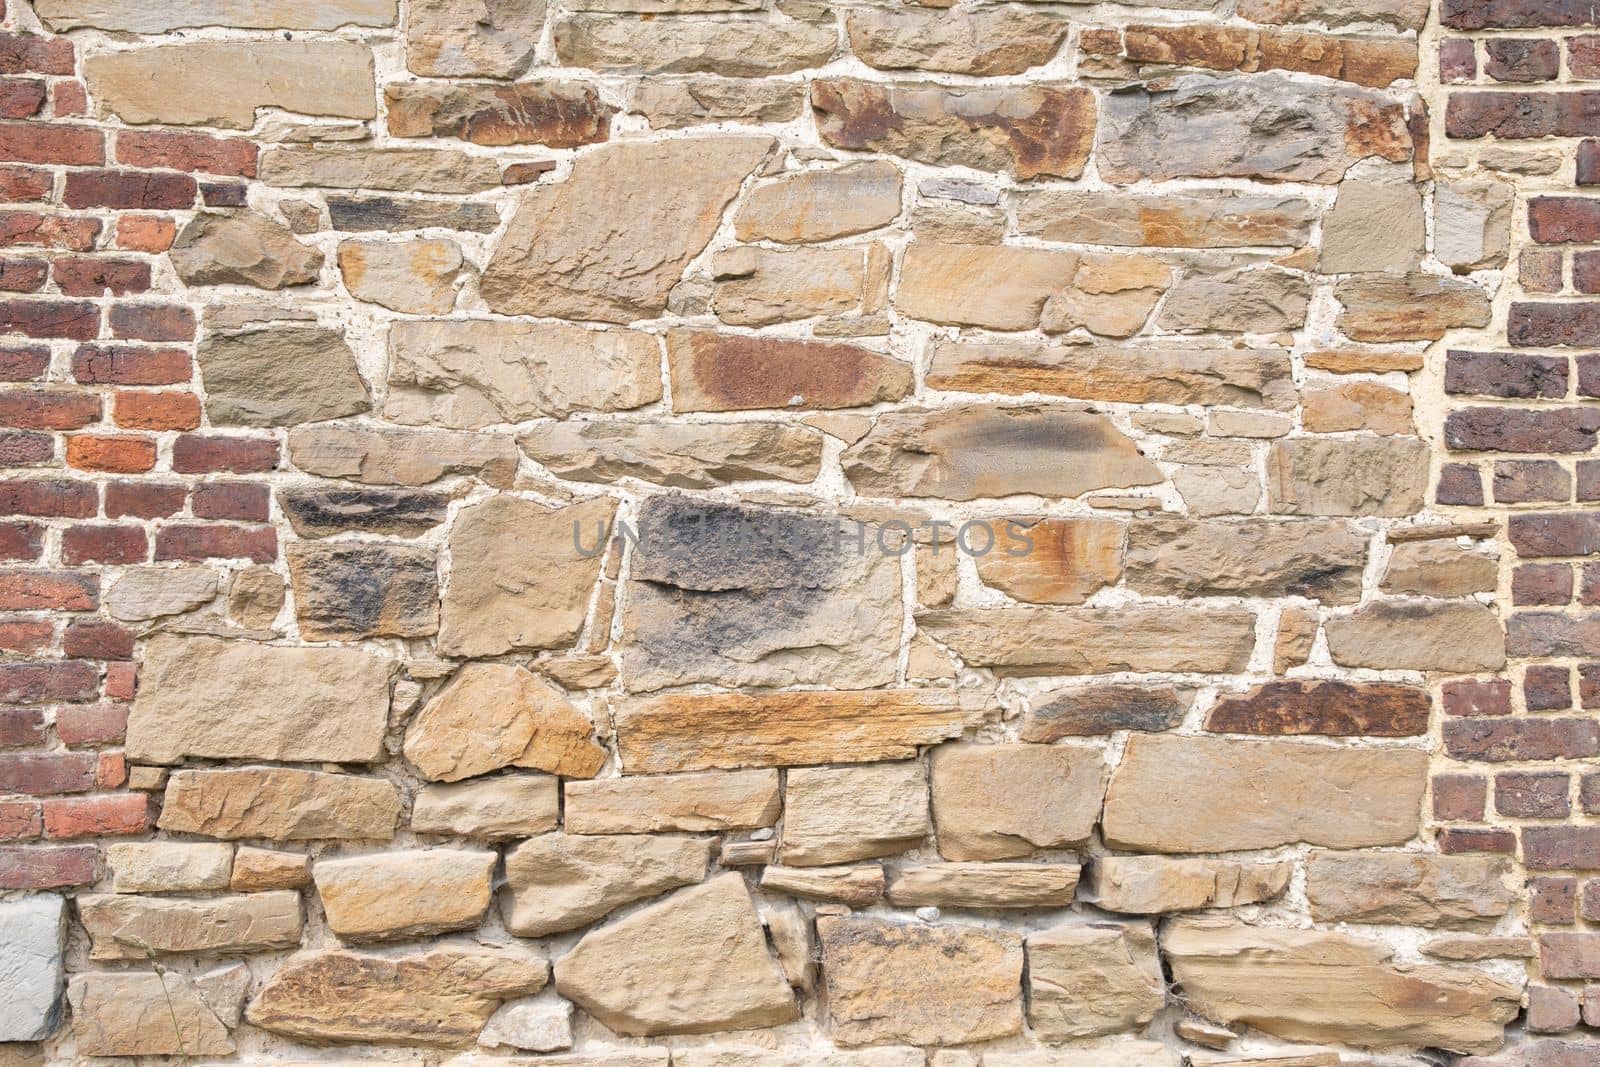 texture of rough masonry yellow rough bricks and cement between them, stone wall High quality photo